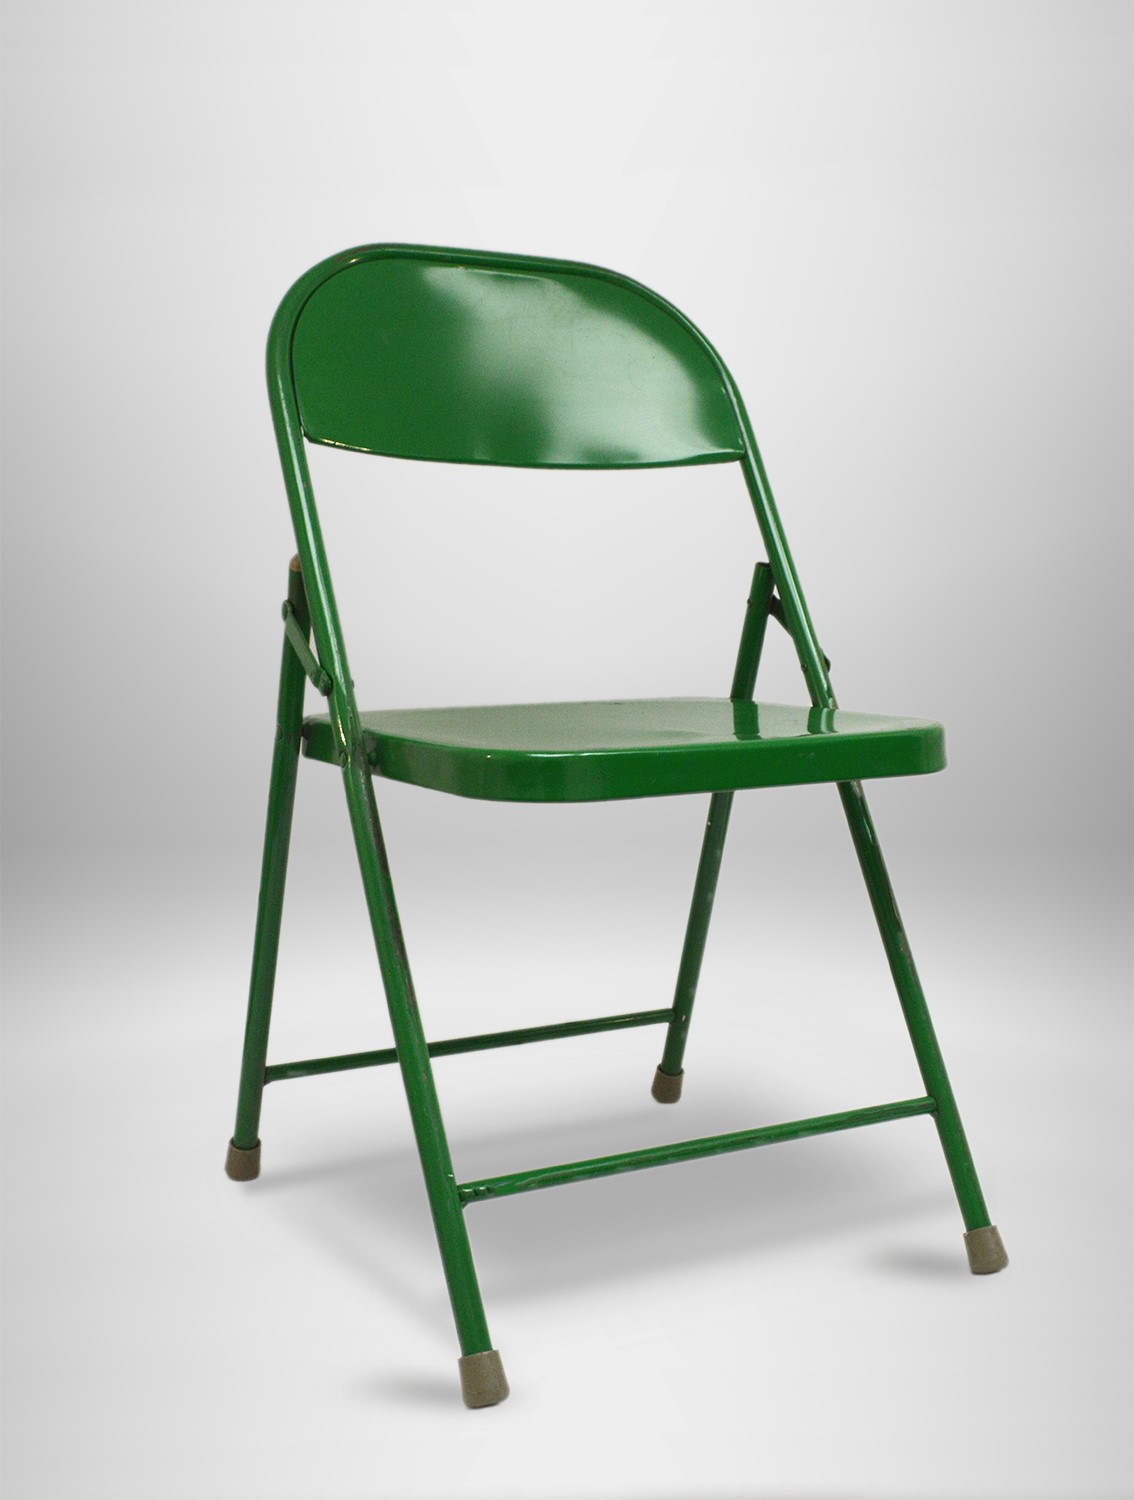 Green Children's Folding Chairs - West Coast Event Productions, Inc.